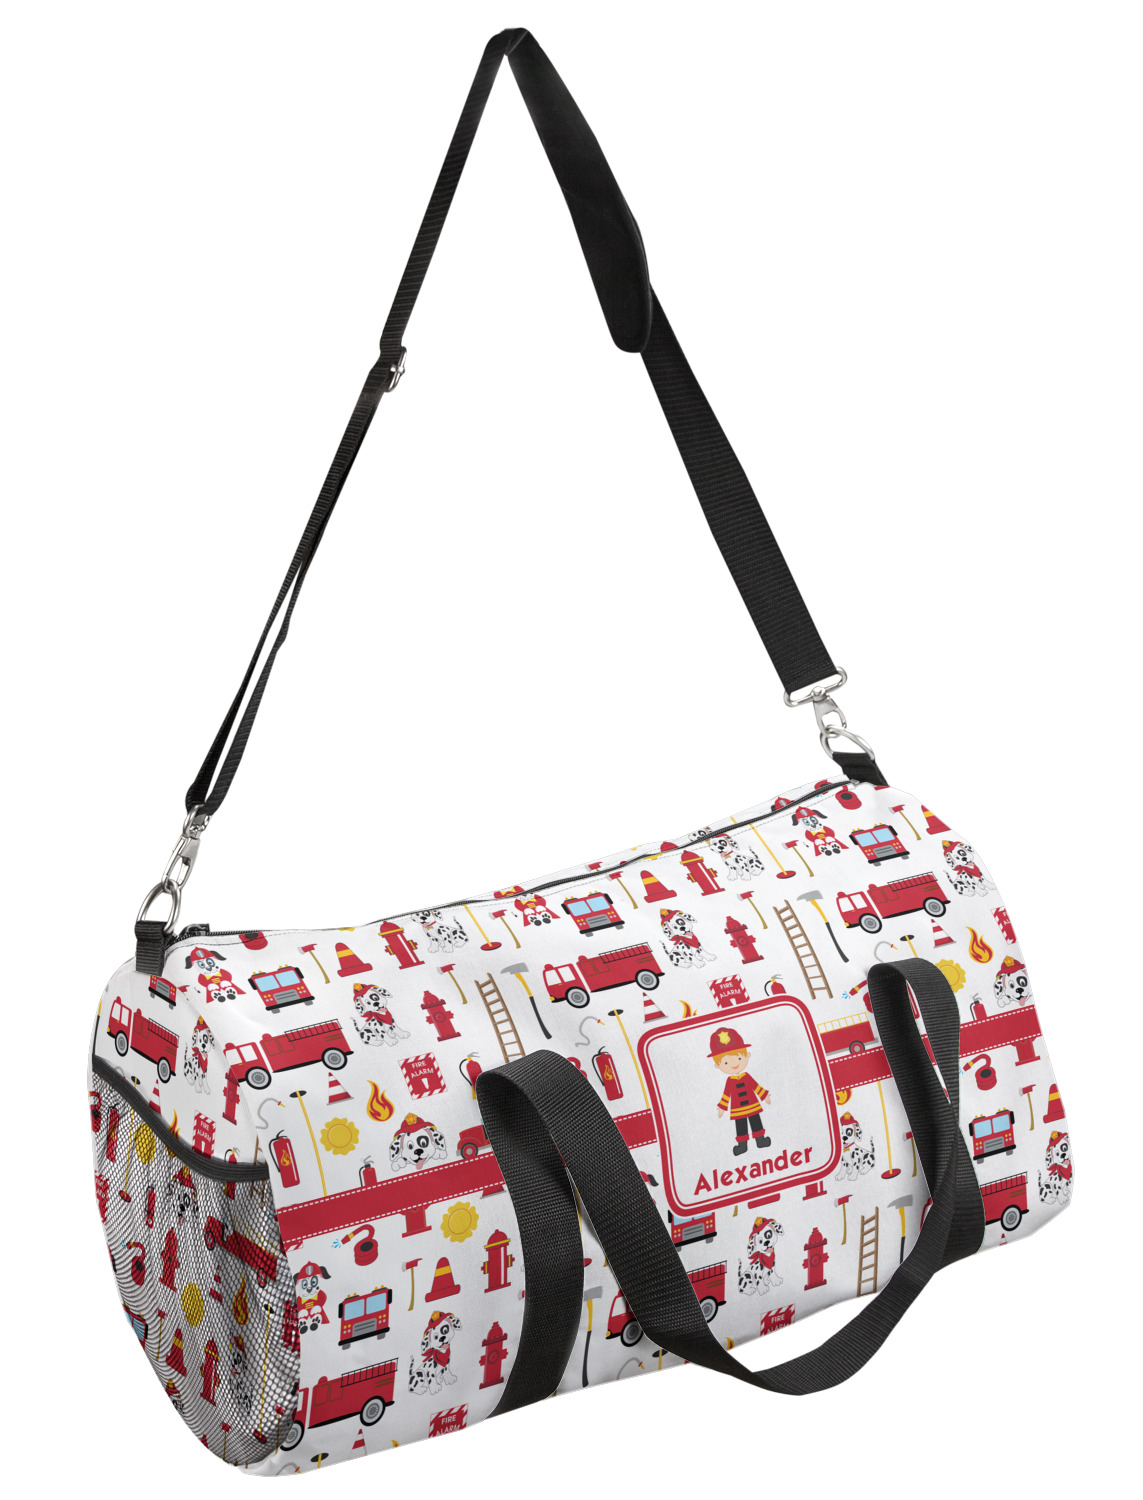 Firefighter for Kids Duffel Bag - Large (Personalized) - YouCustomizeIt